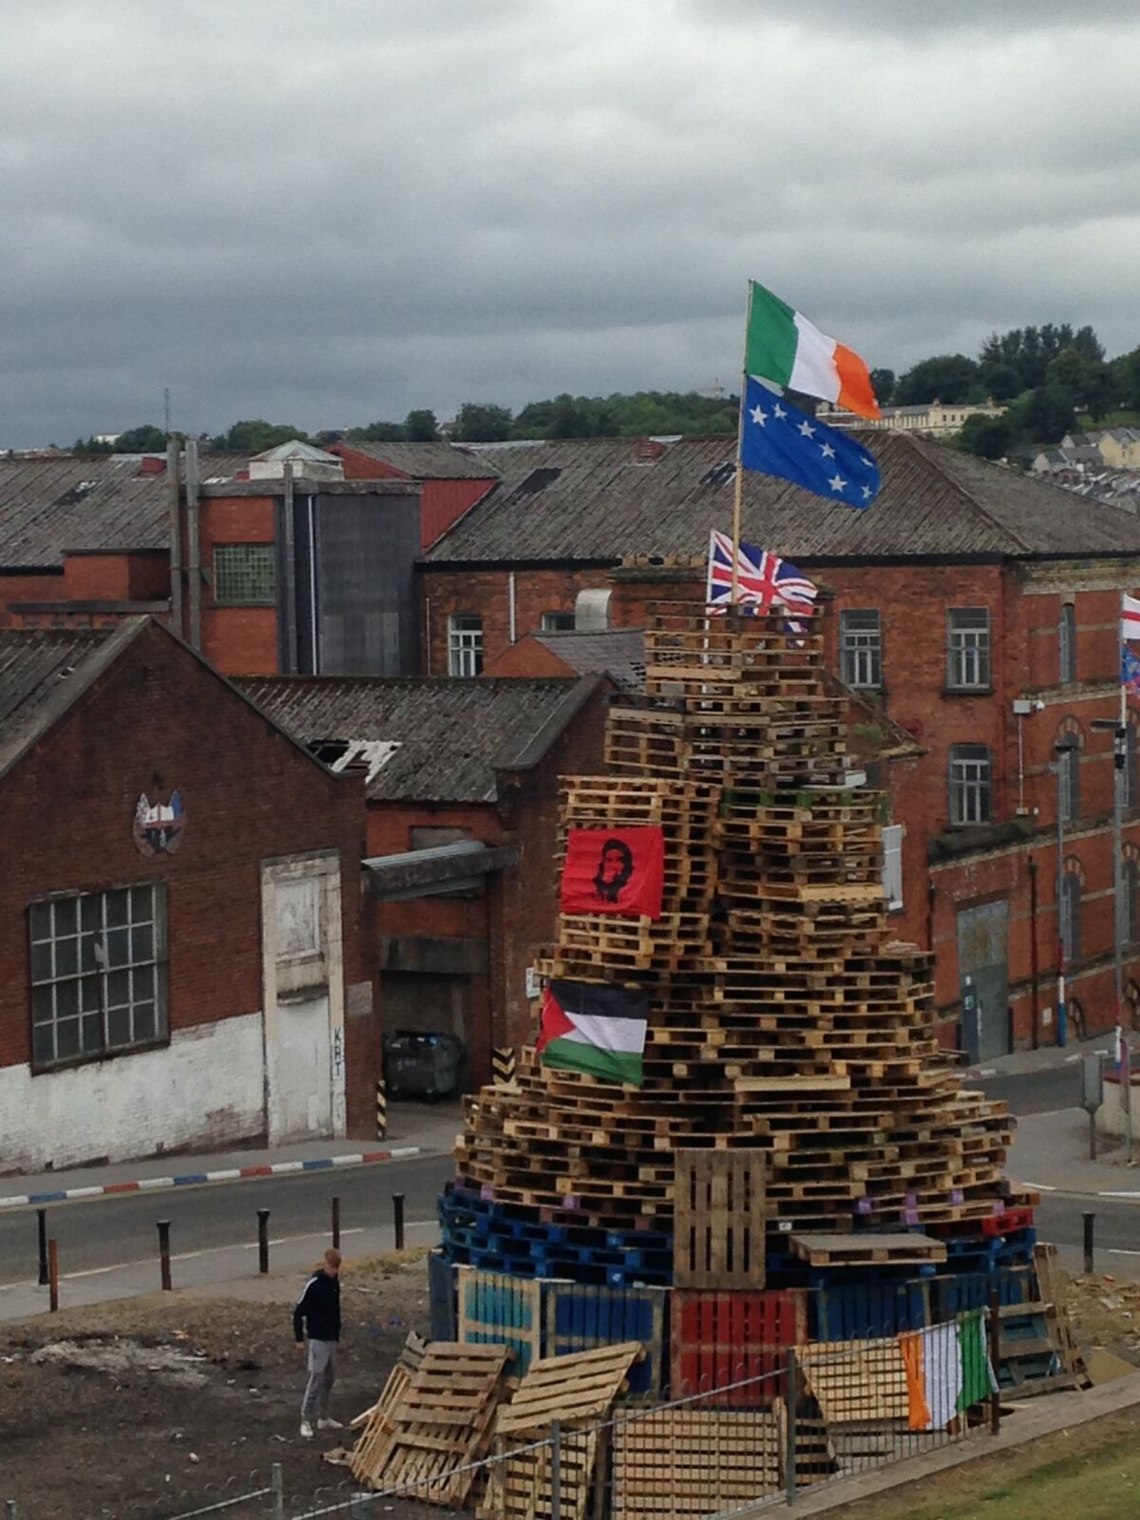 A giant bonfire is prepared in Derry. Brooke Bull visited Belfast and Derry during Marching season, when tensions run high in Northern Ireland. 